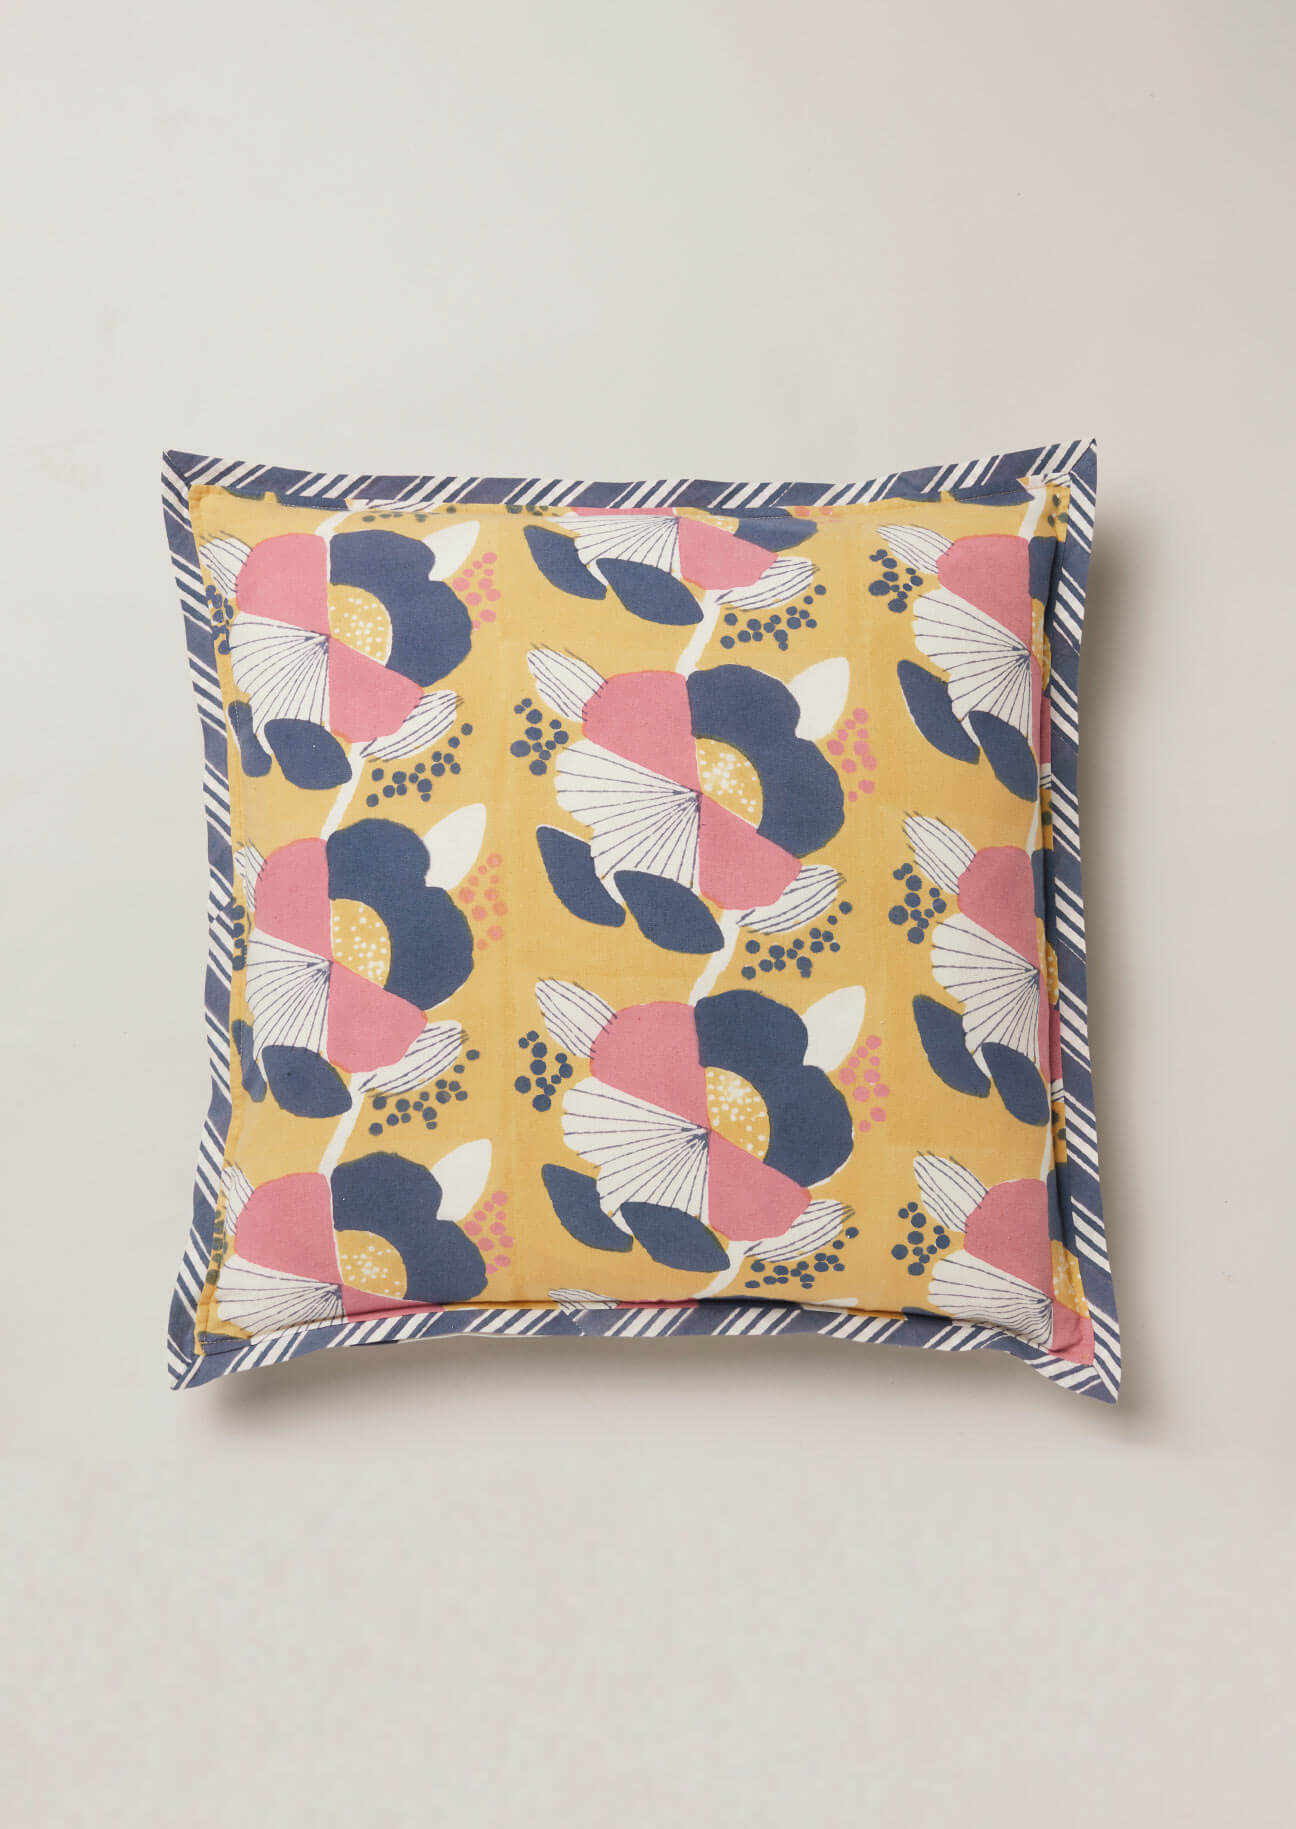 Ochre block print cush ion with navy and pink large scale flower designand contrast navy stripe edging.